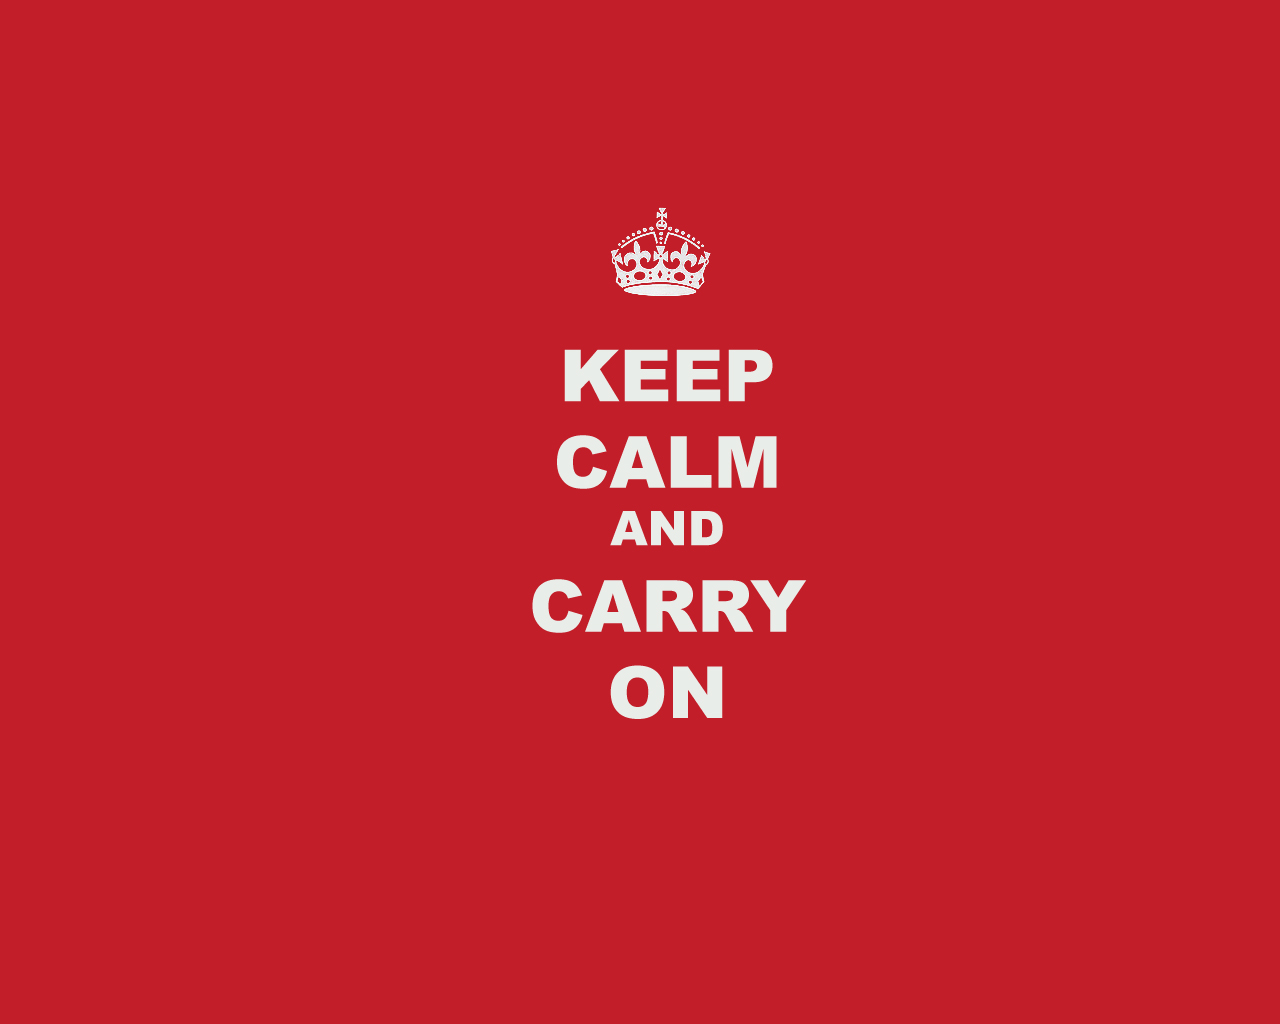  Calm and Carry On wallpapers Keep Calm and Carry On stock photos